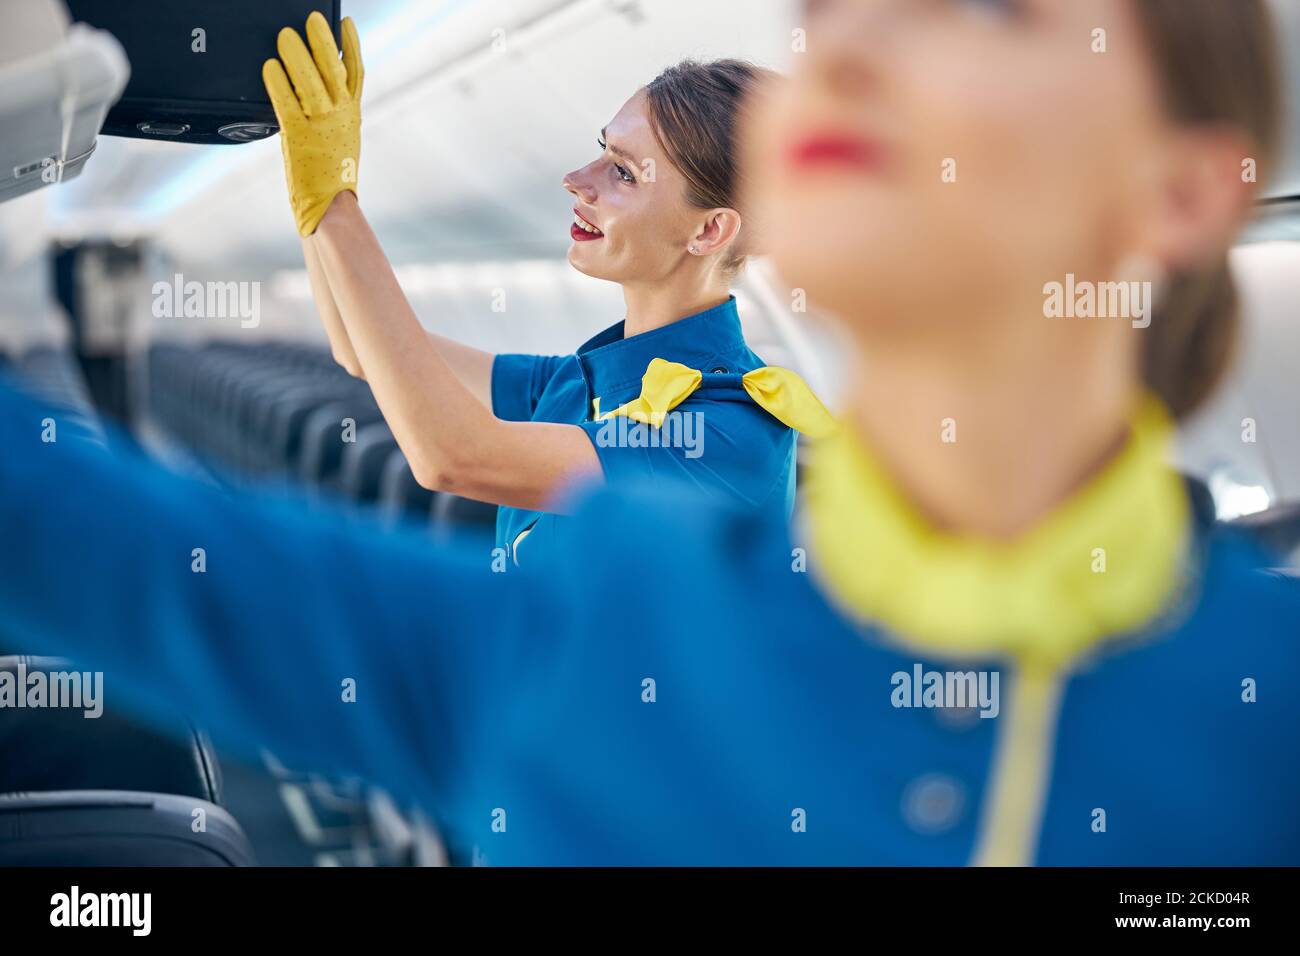 Close up portrait of smiling cheerful female wearing flight attendant blue uniform holding in hand black rolling bag while putting it on the cabin com Stock Photo